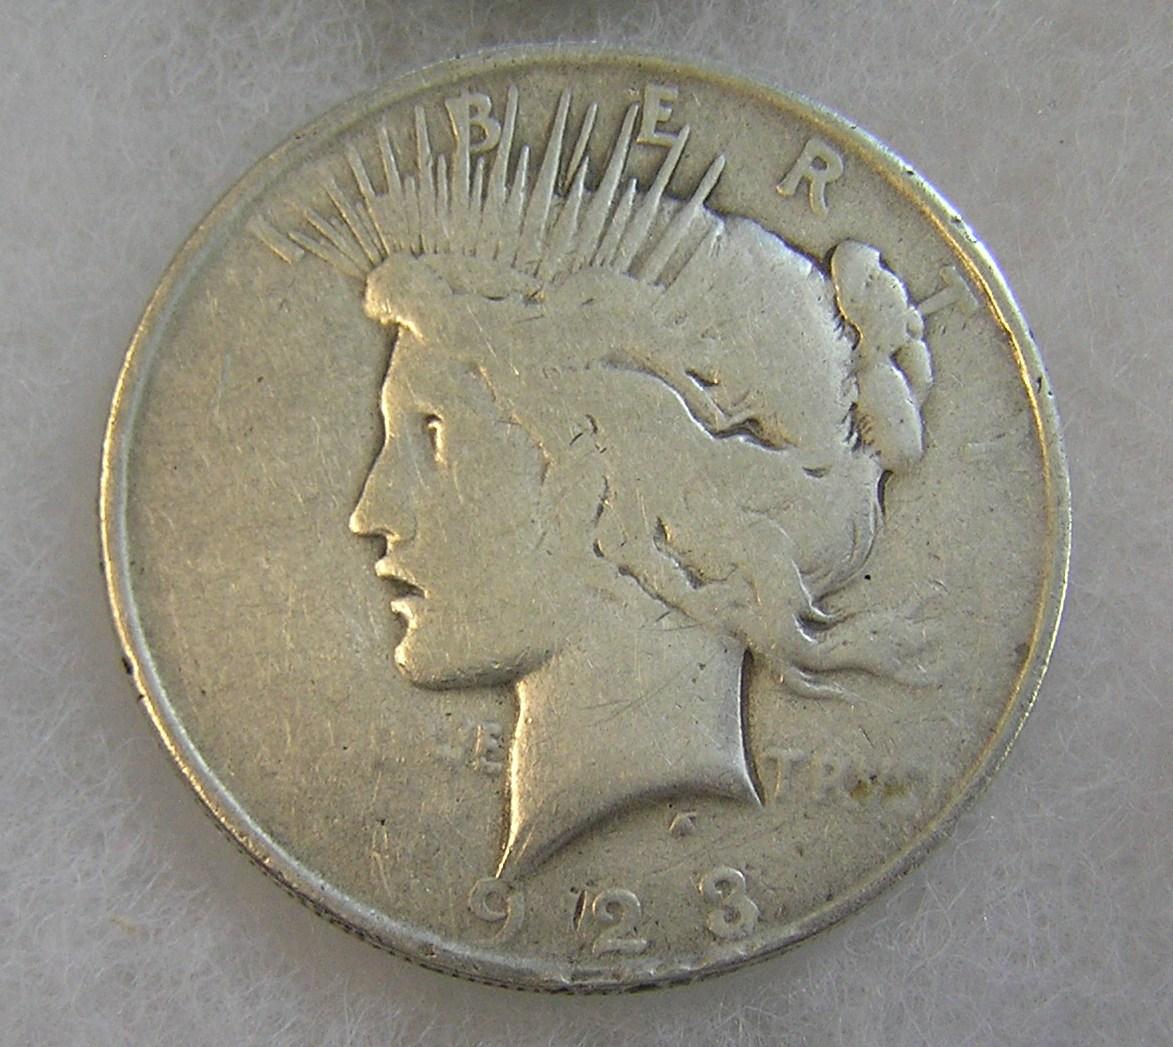 1923 Lady Liberty Peace silver dollar in good condition